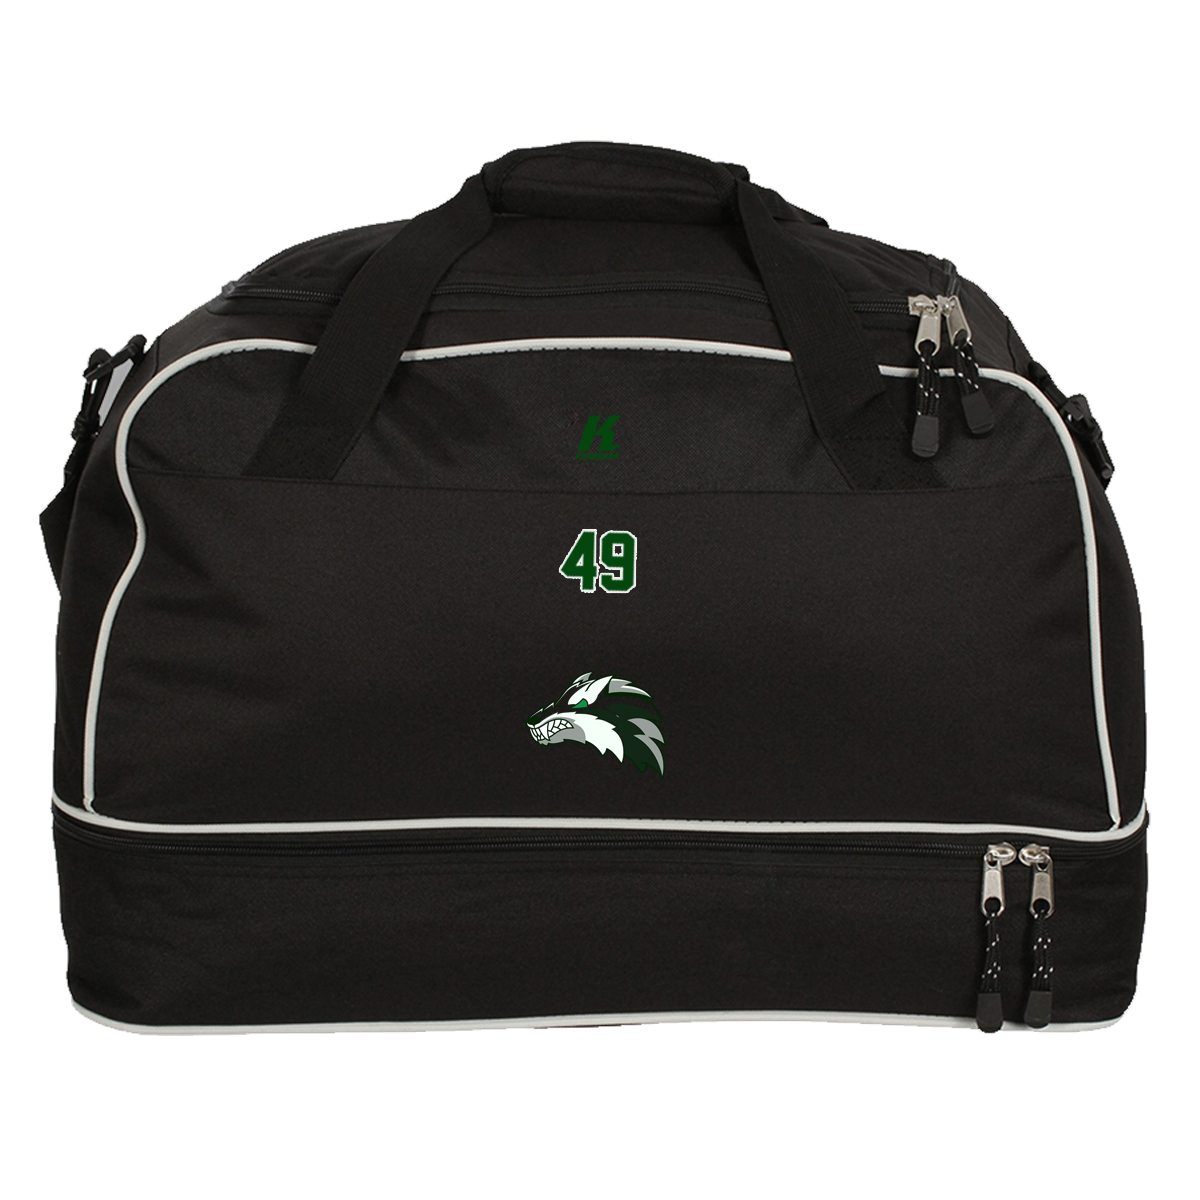 Wolves Players CT Bag with Playernumber or Initials